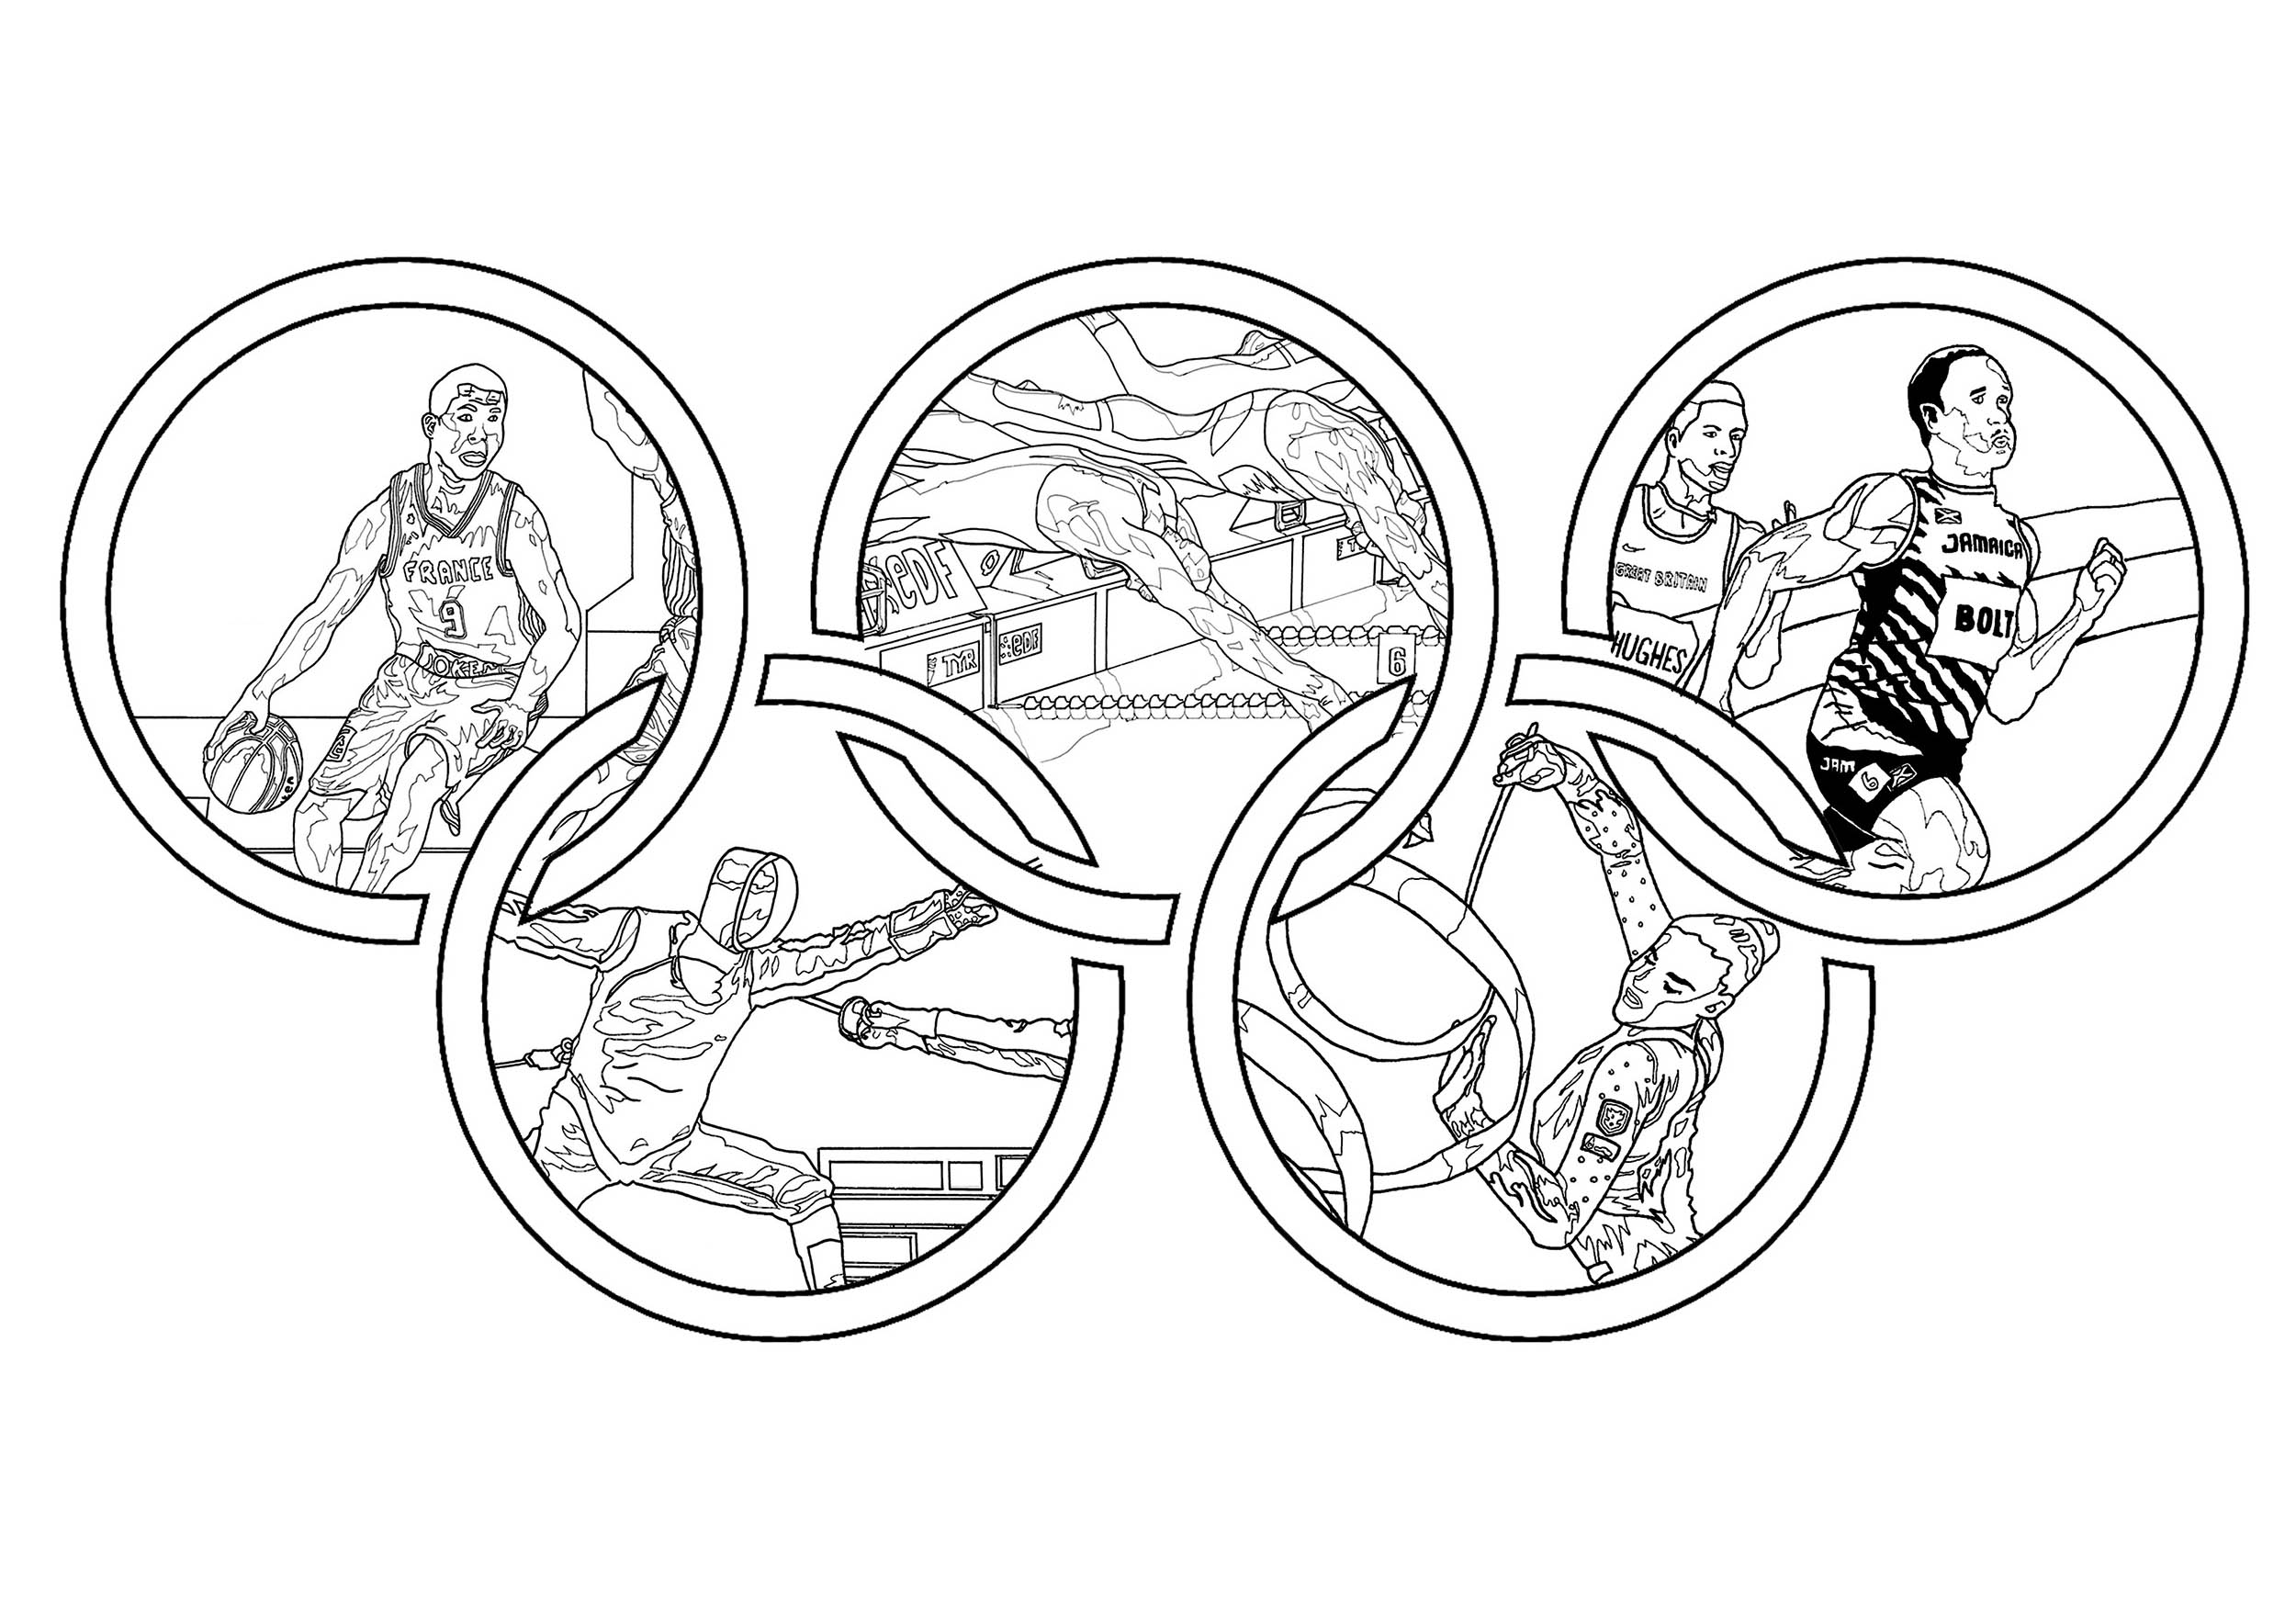 Drawings To Paint & Colour of Olympics